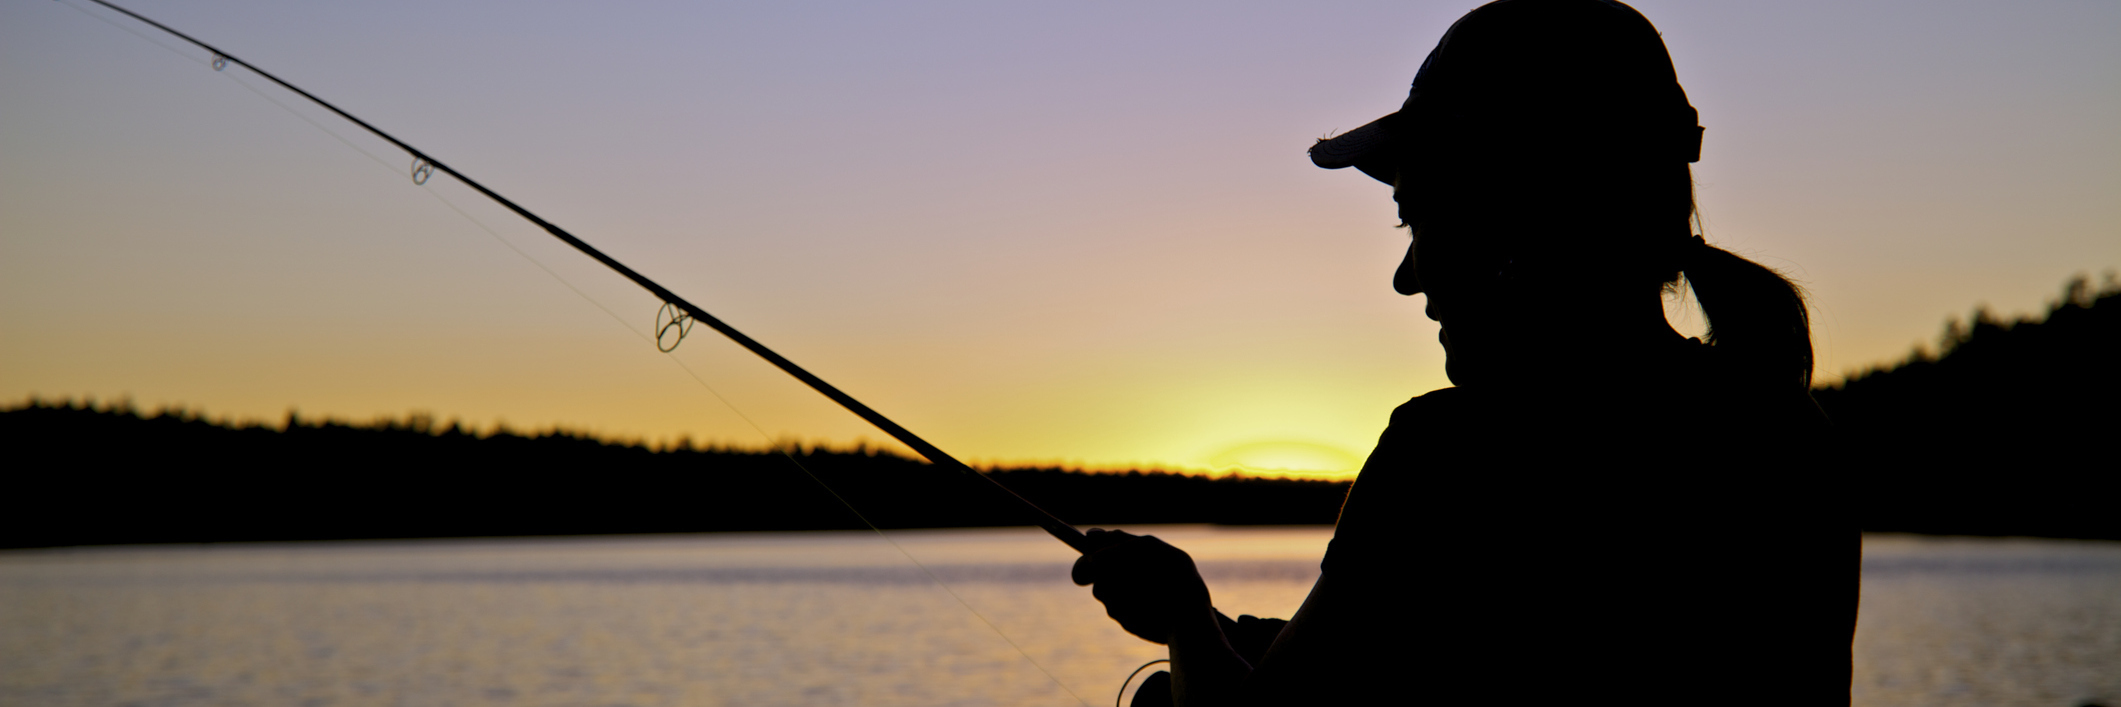 A woman fishing, silhouetted in the sunset.